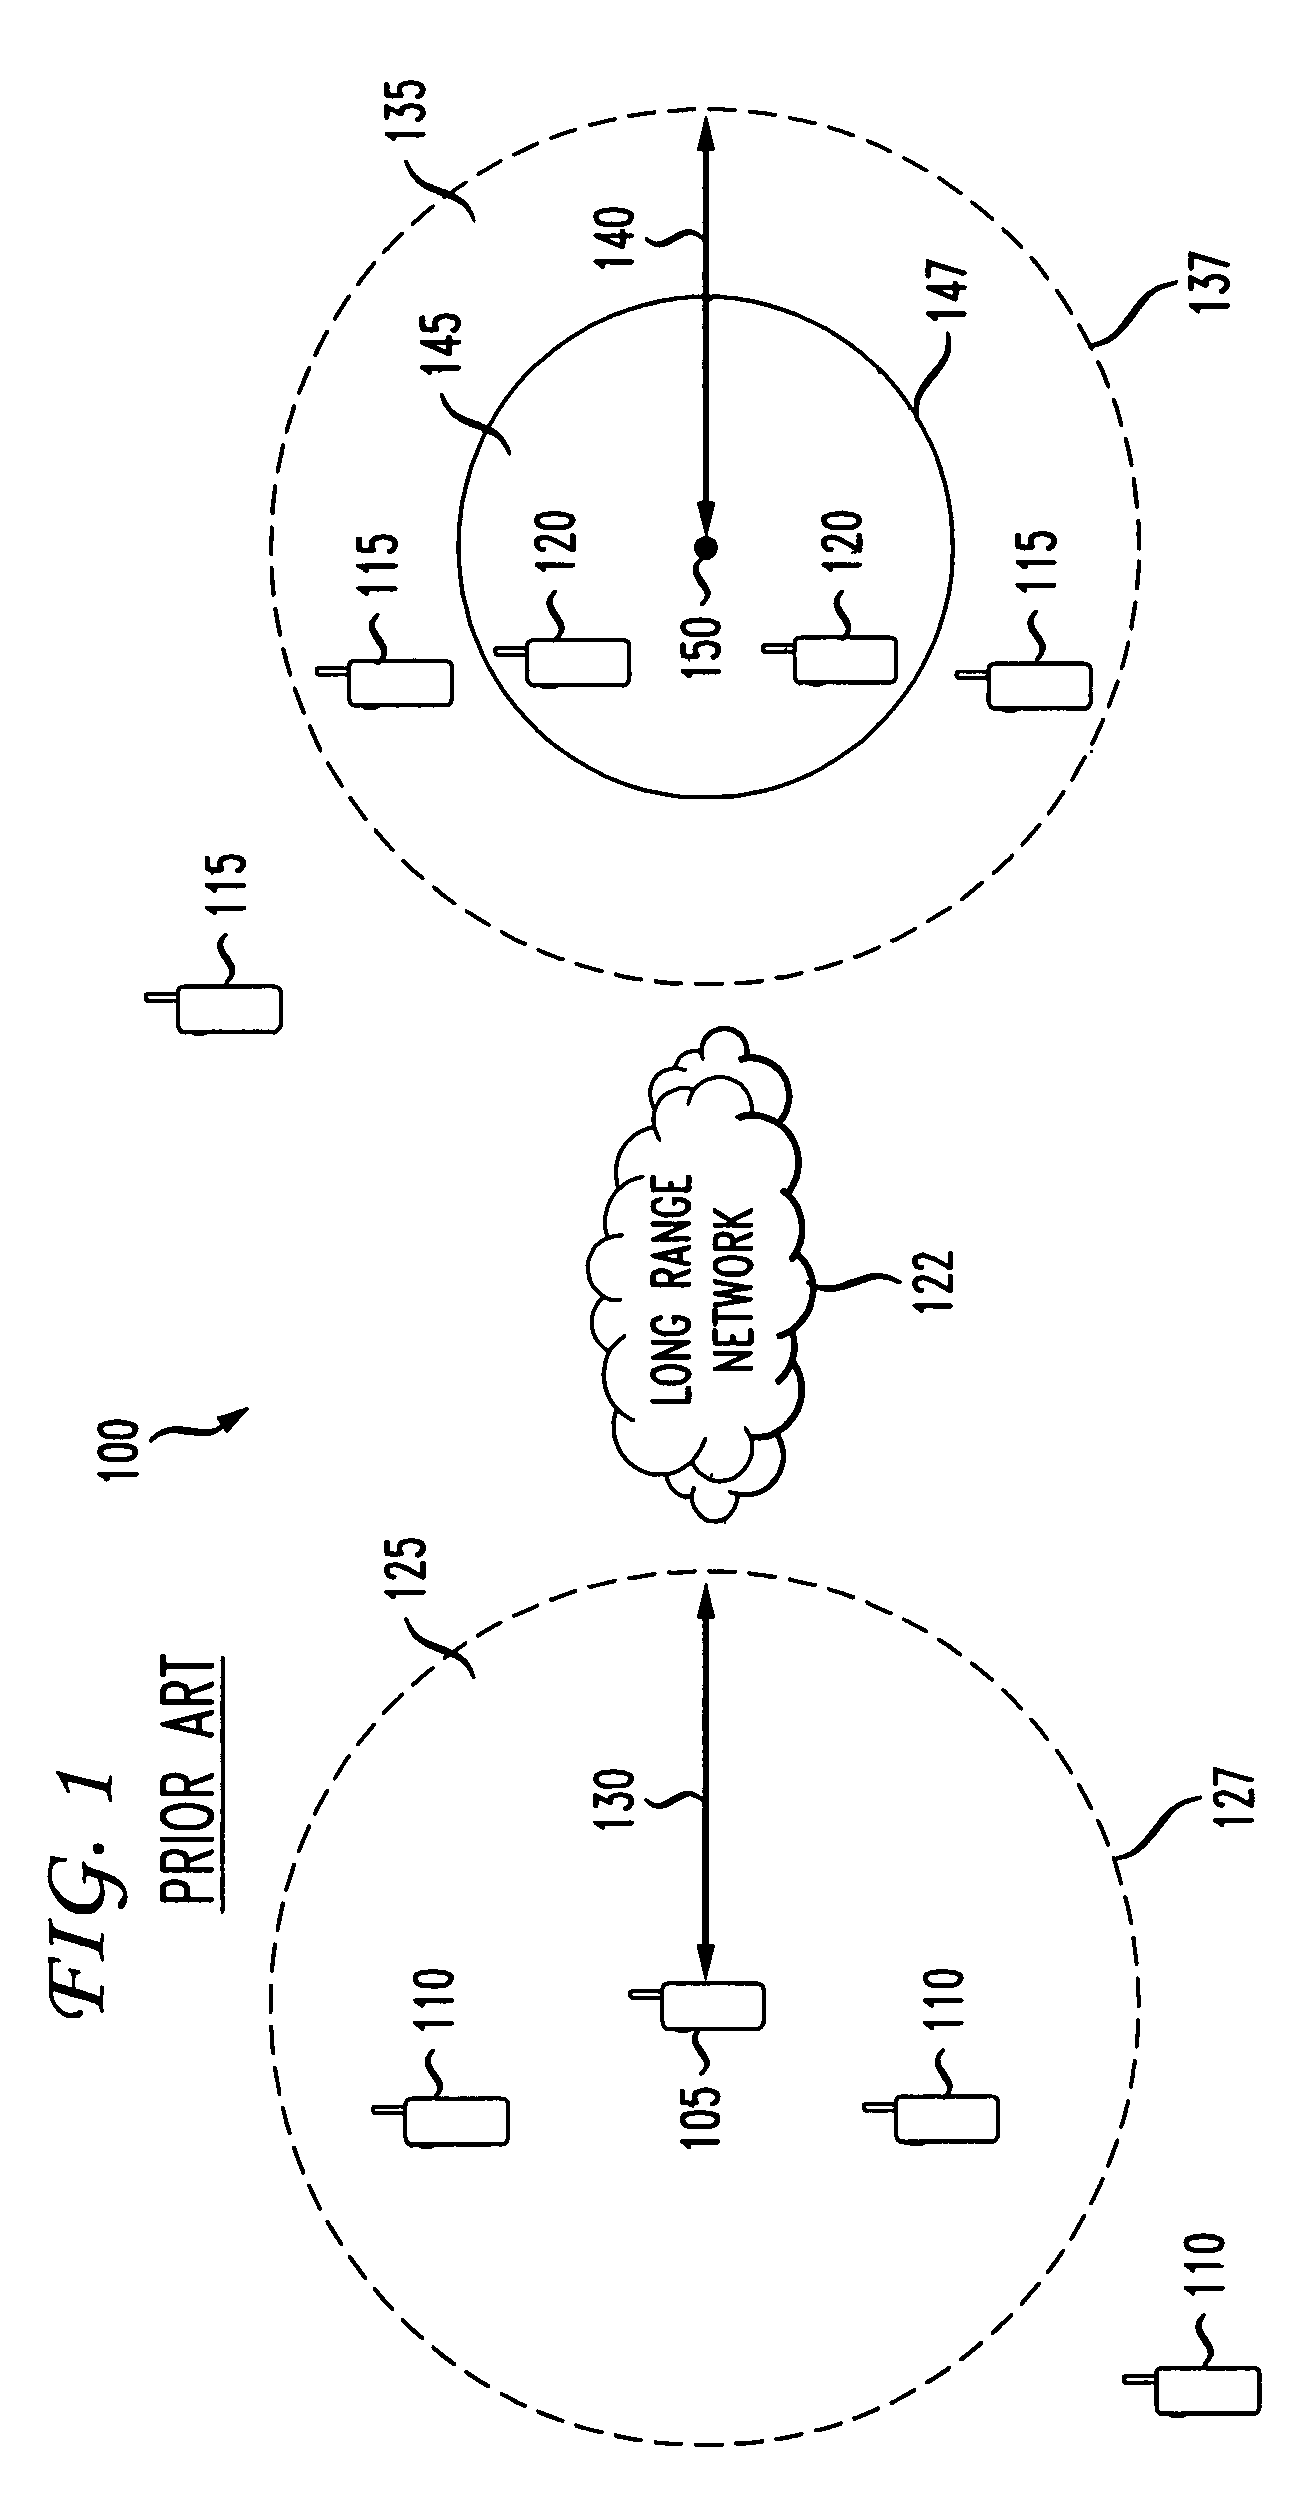 System and method for geocasting in a mobile ad hoc network